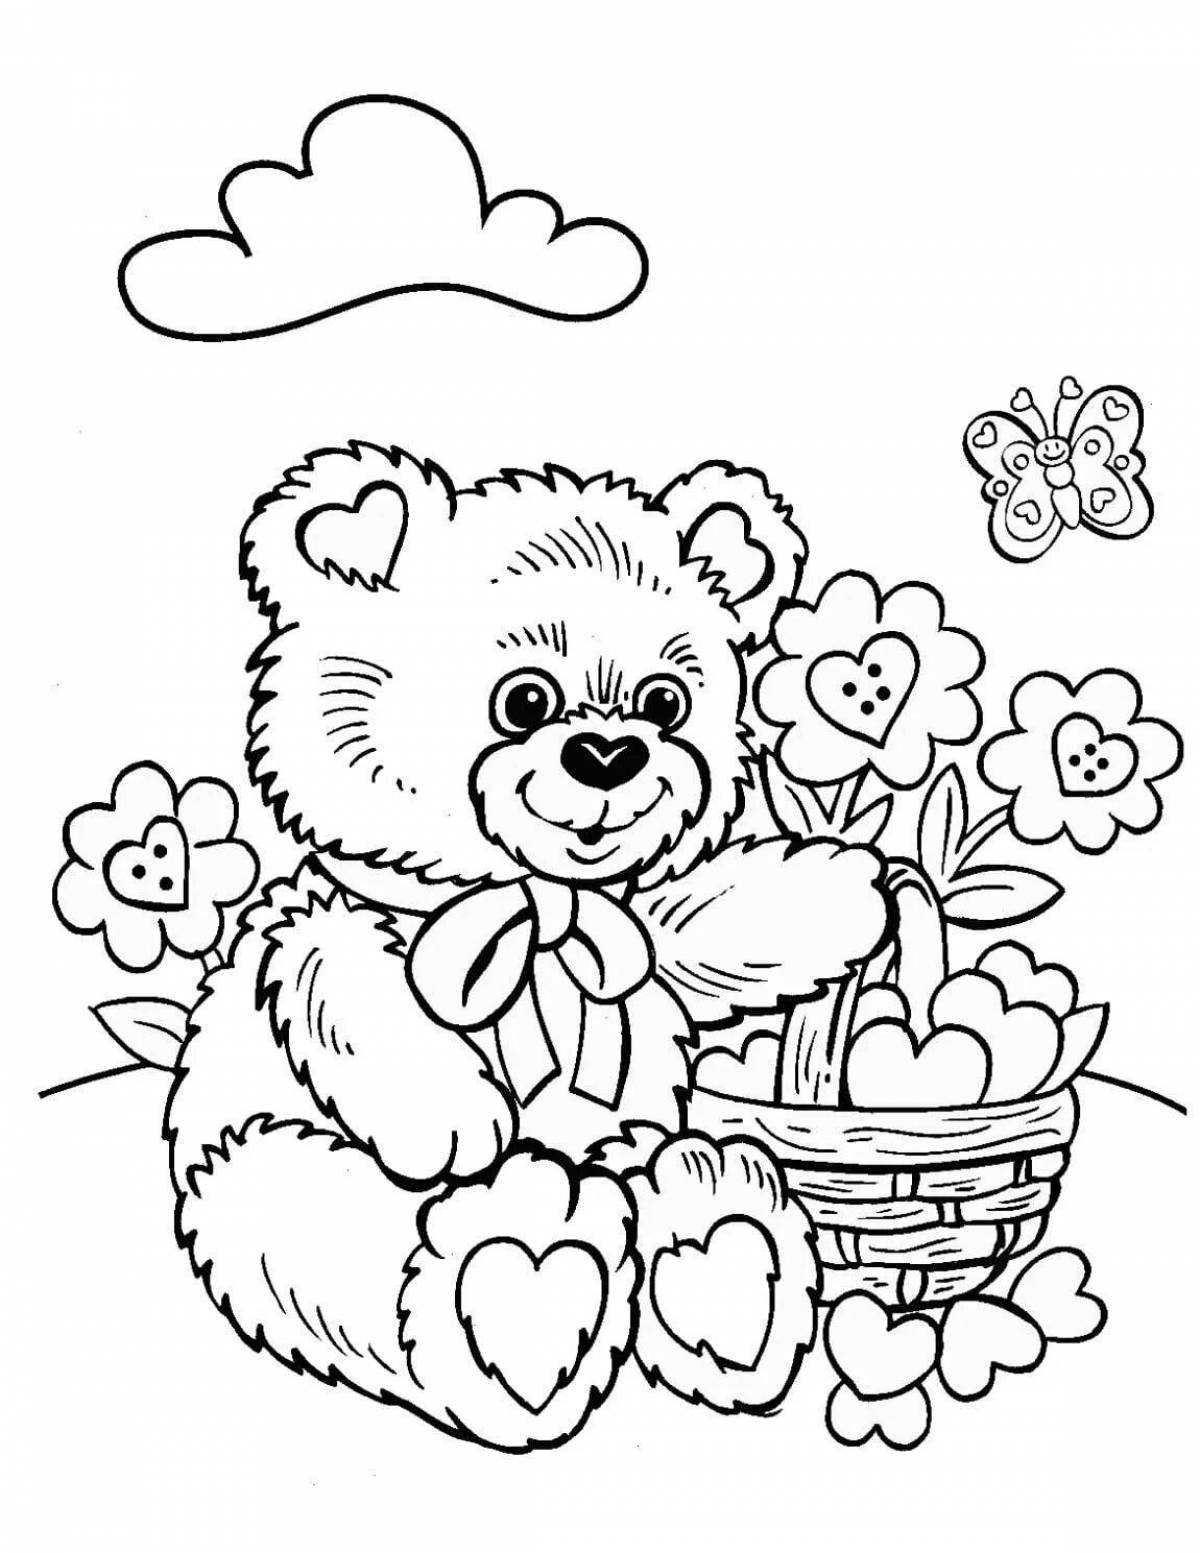 Colorful and fluffy teddy bear coloring book